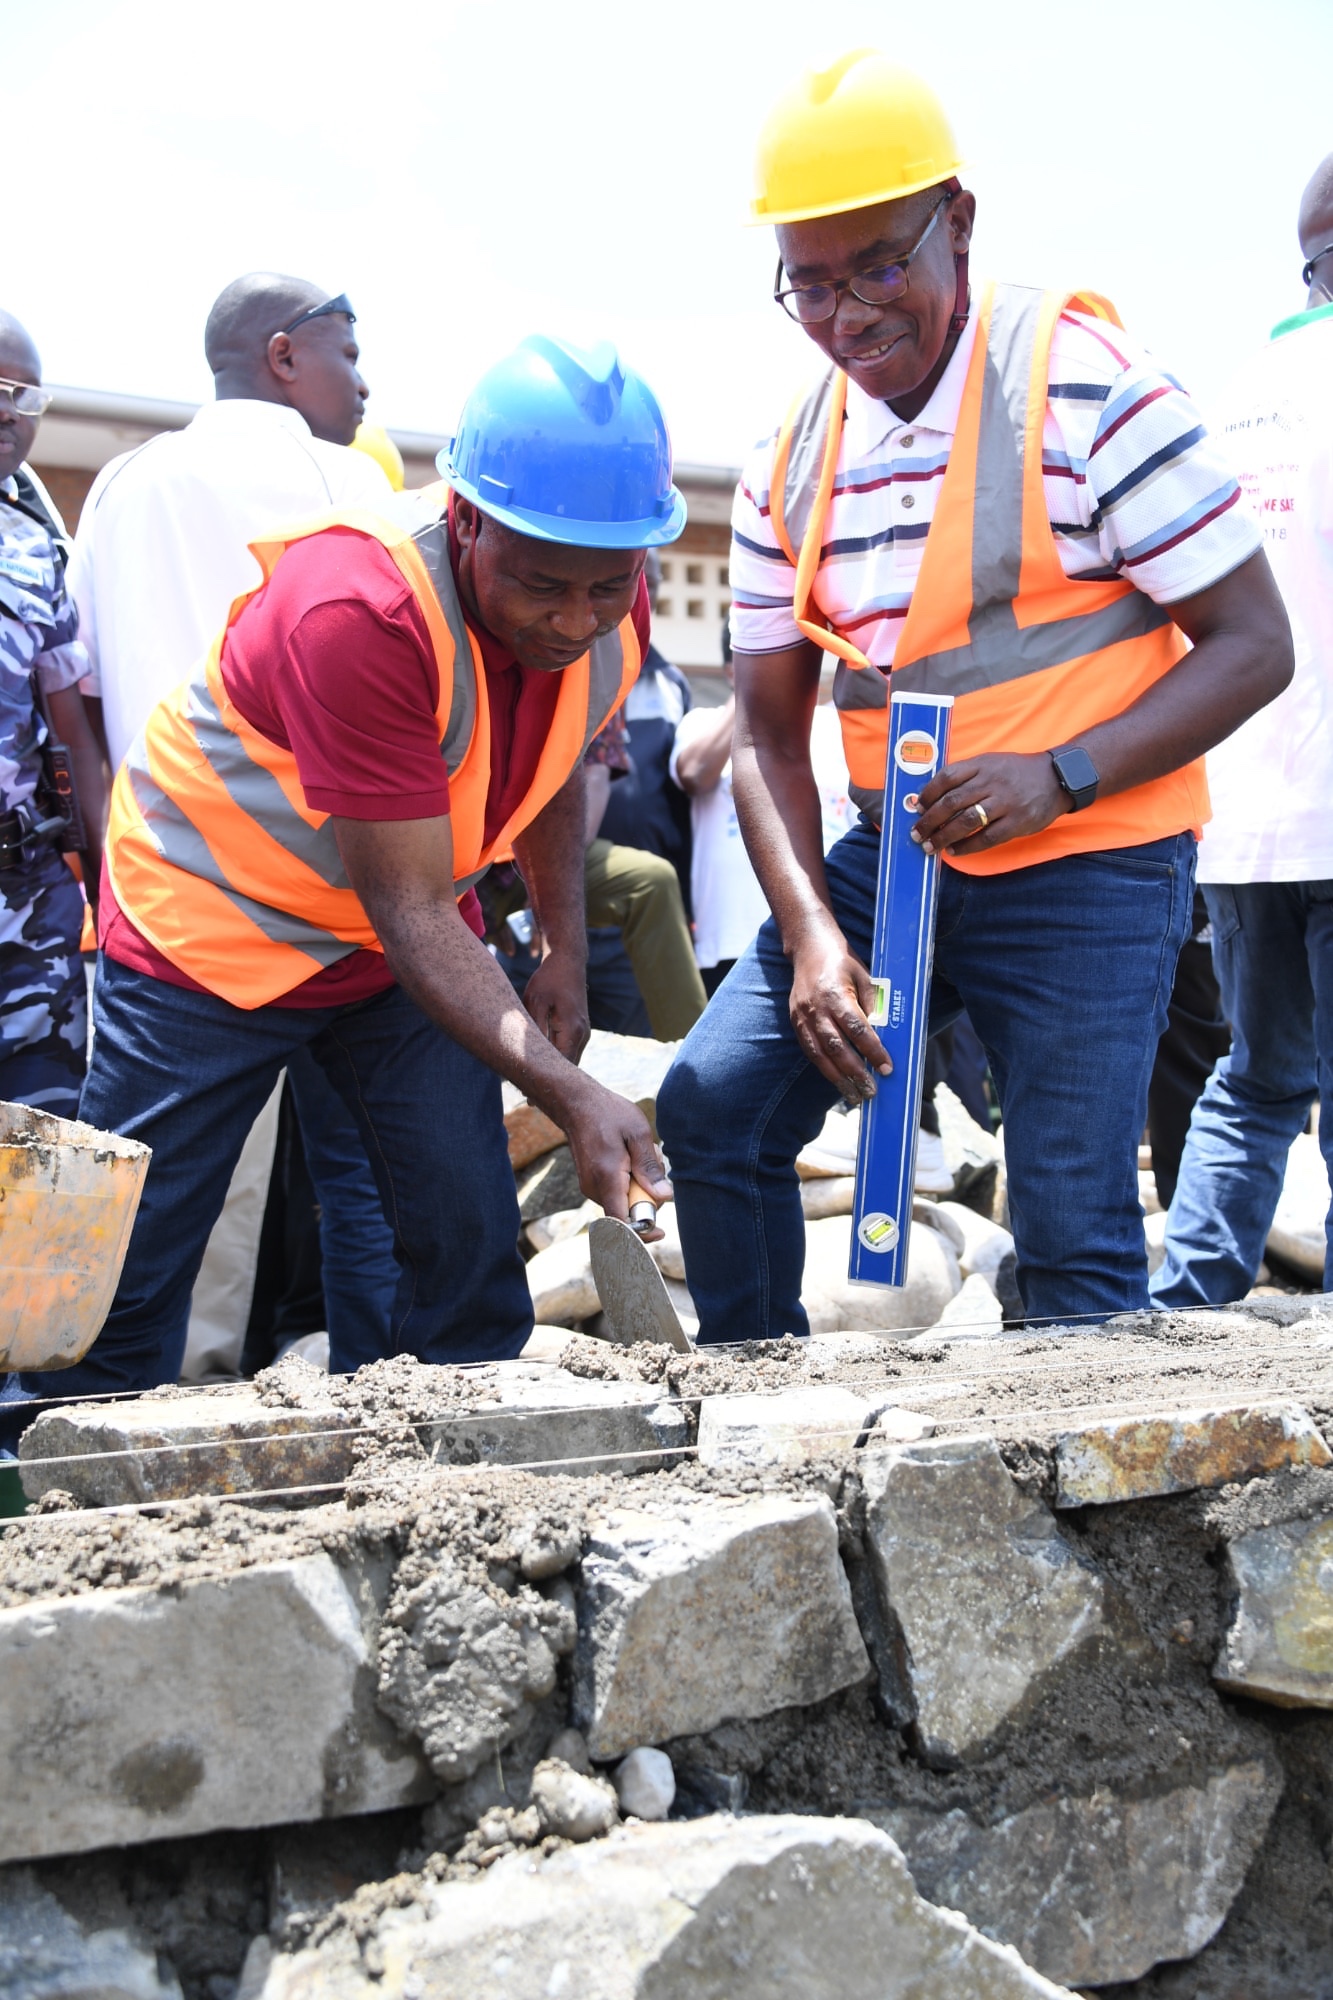 Head of State launches construction works for a COVID-19 screening center in Gihanga Commune